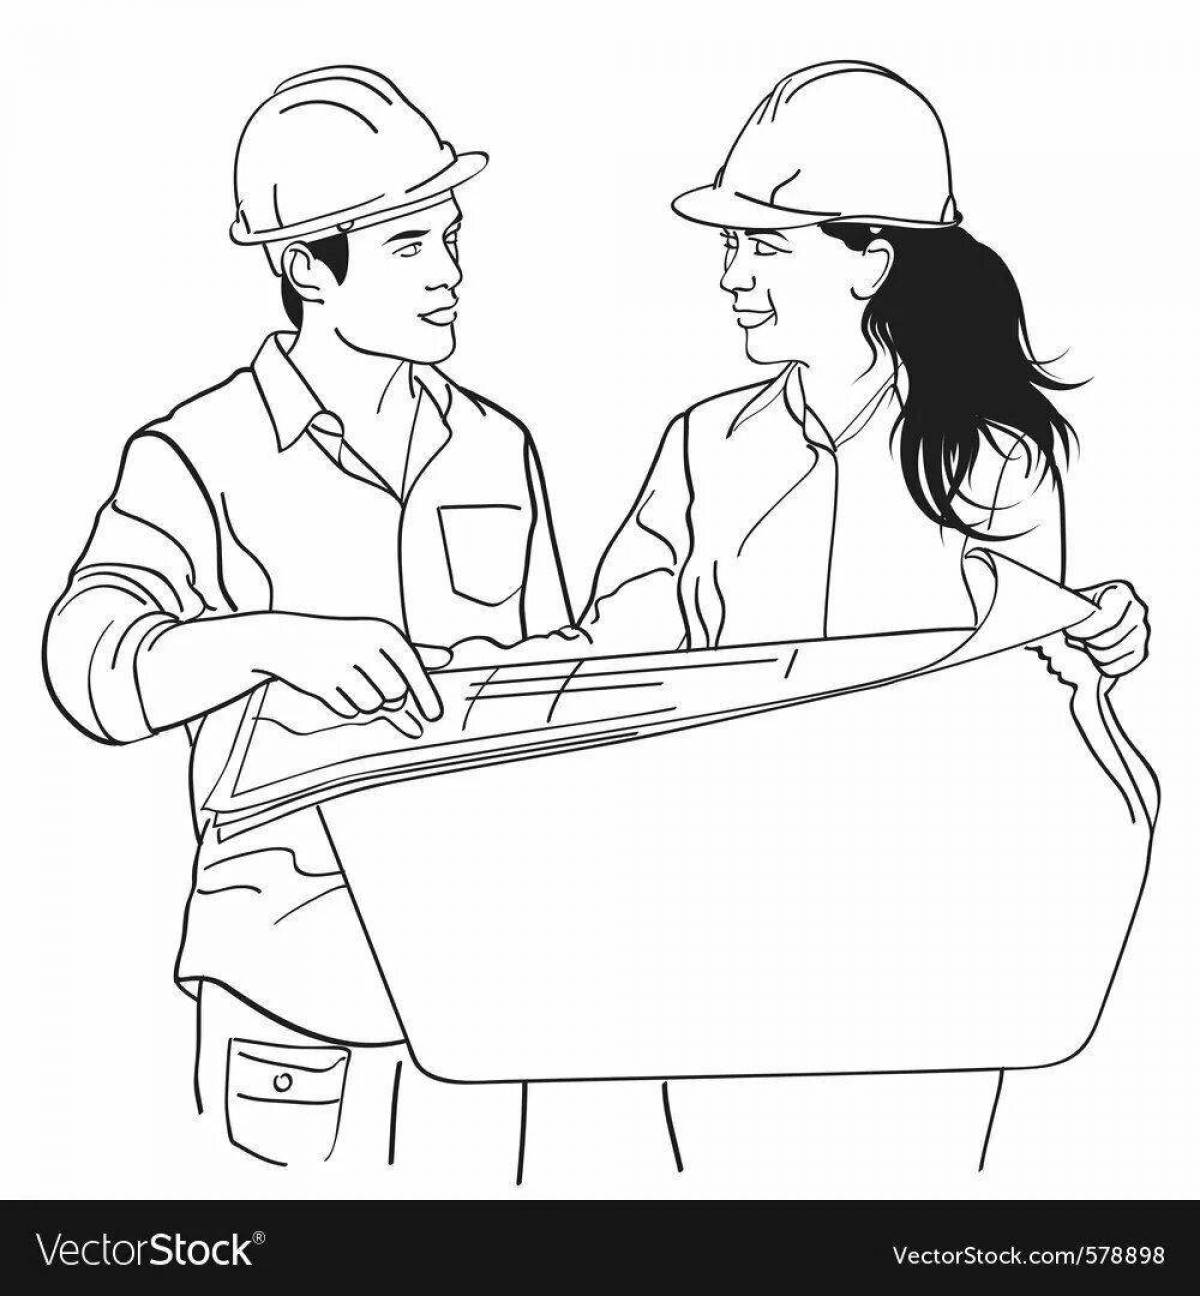 Experienced engineer coloring page